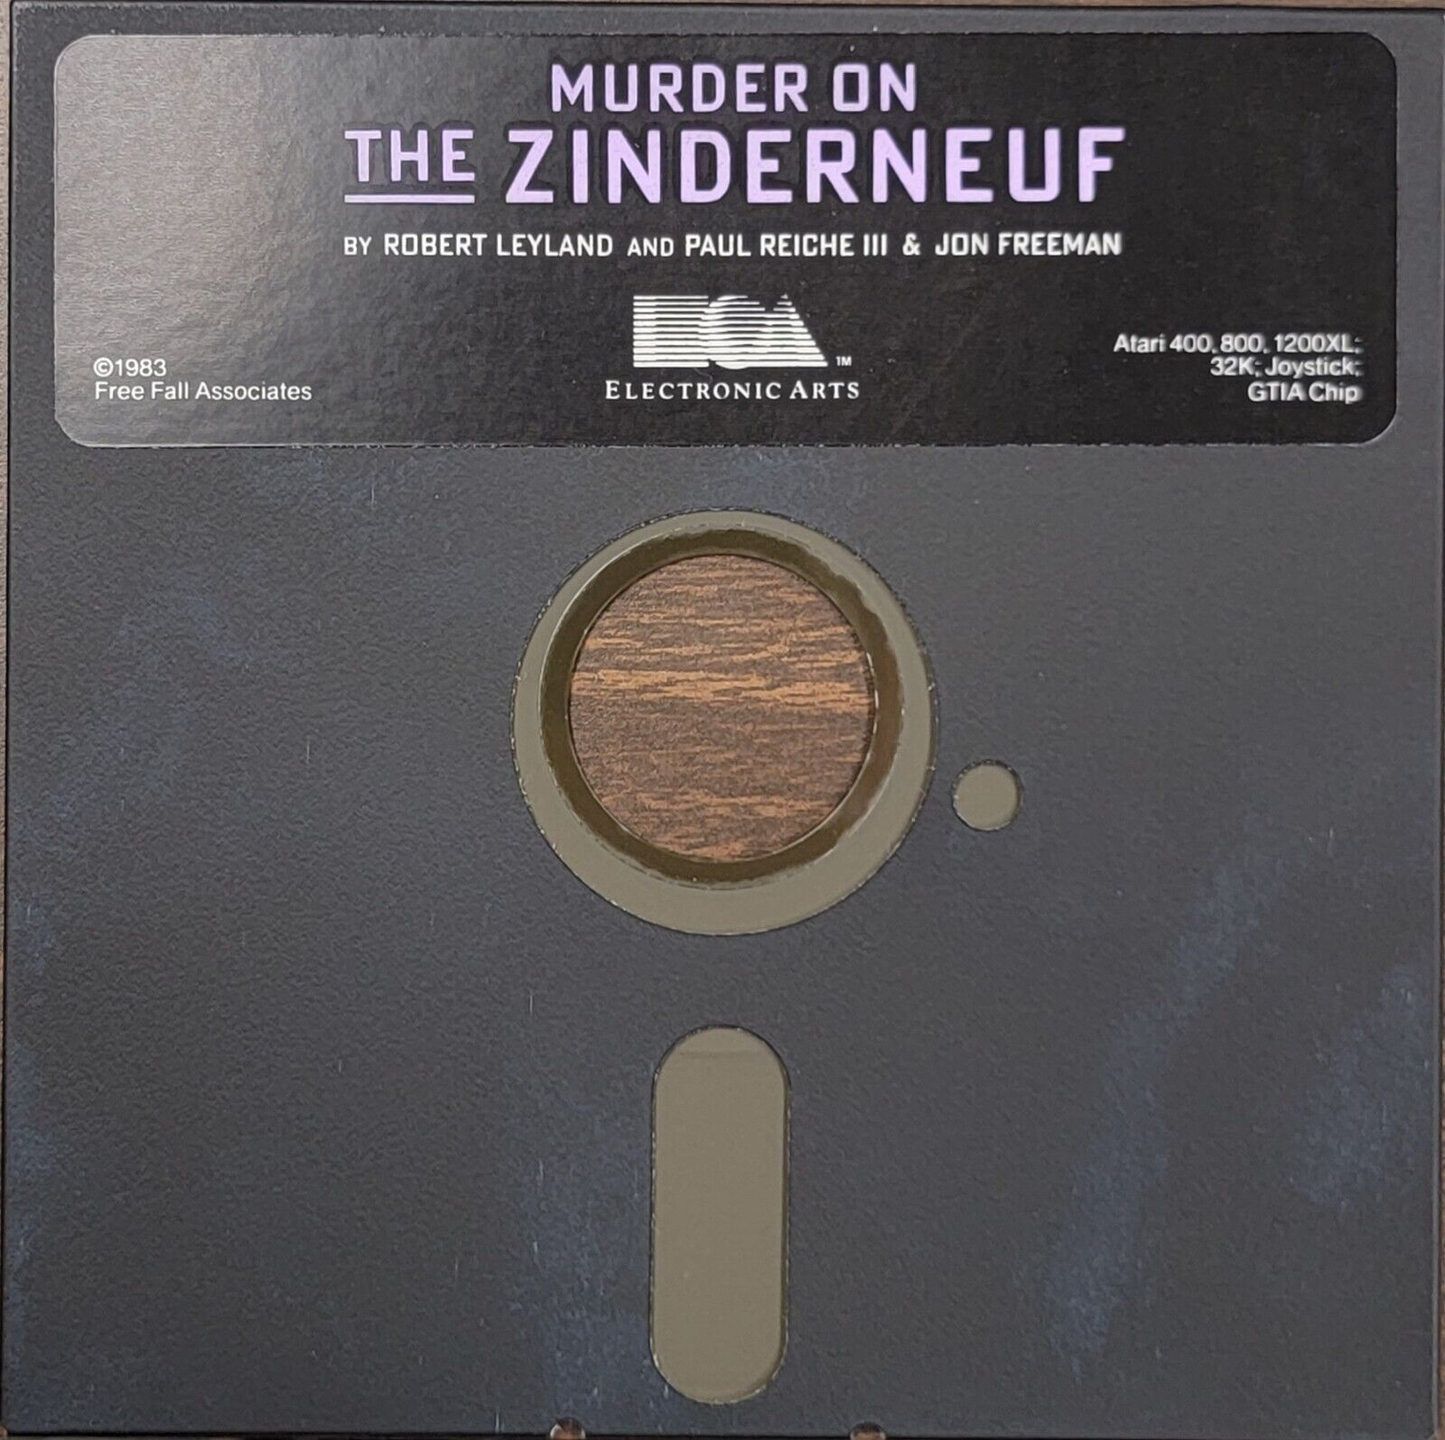 Murder on the Zinderneuf - Commodore 64